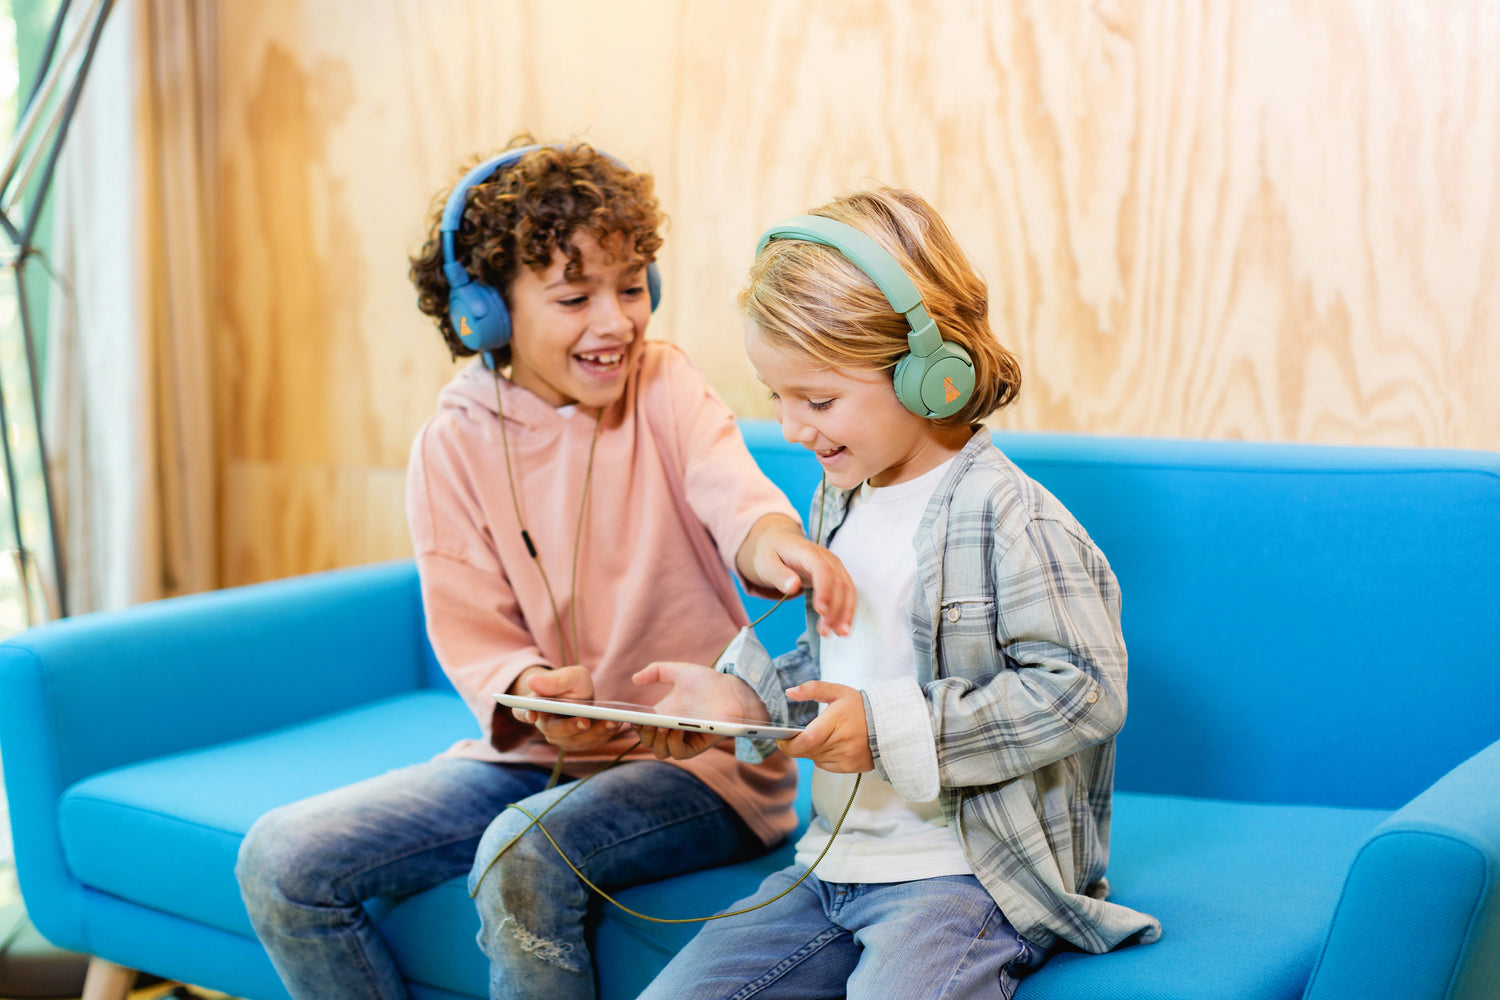 Two boys on a couch listening together wearing The Elephant headphones